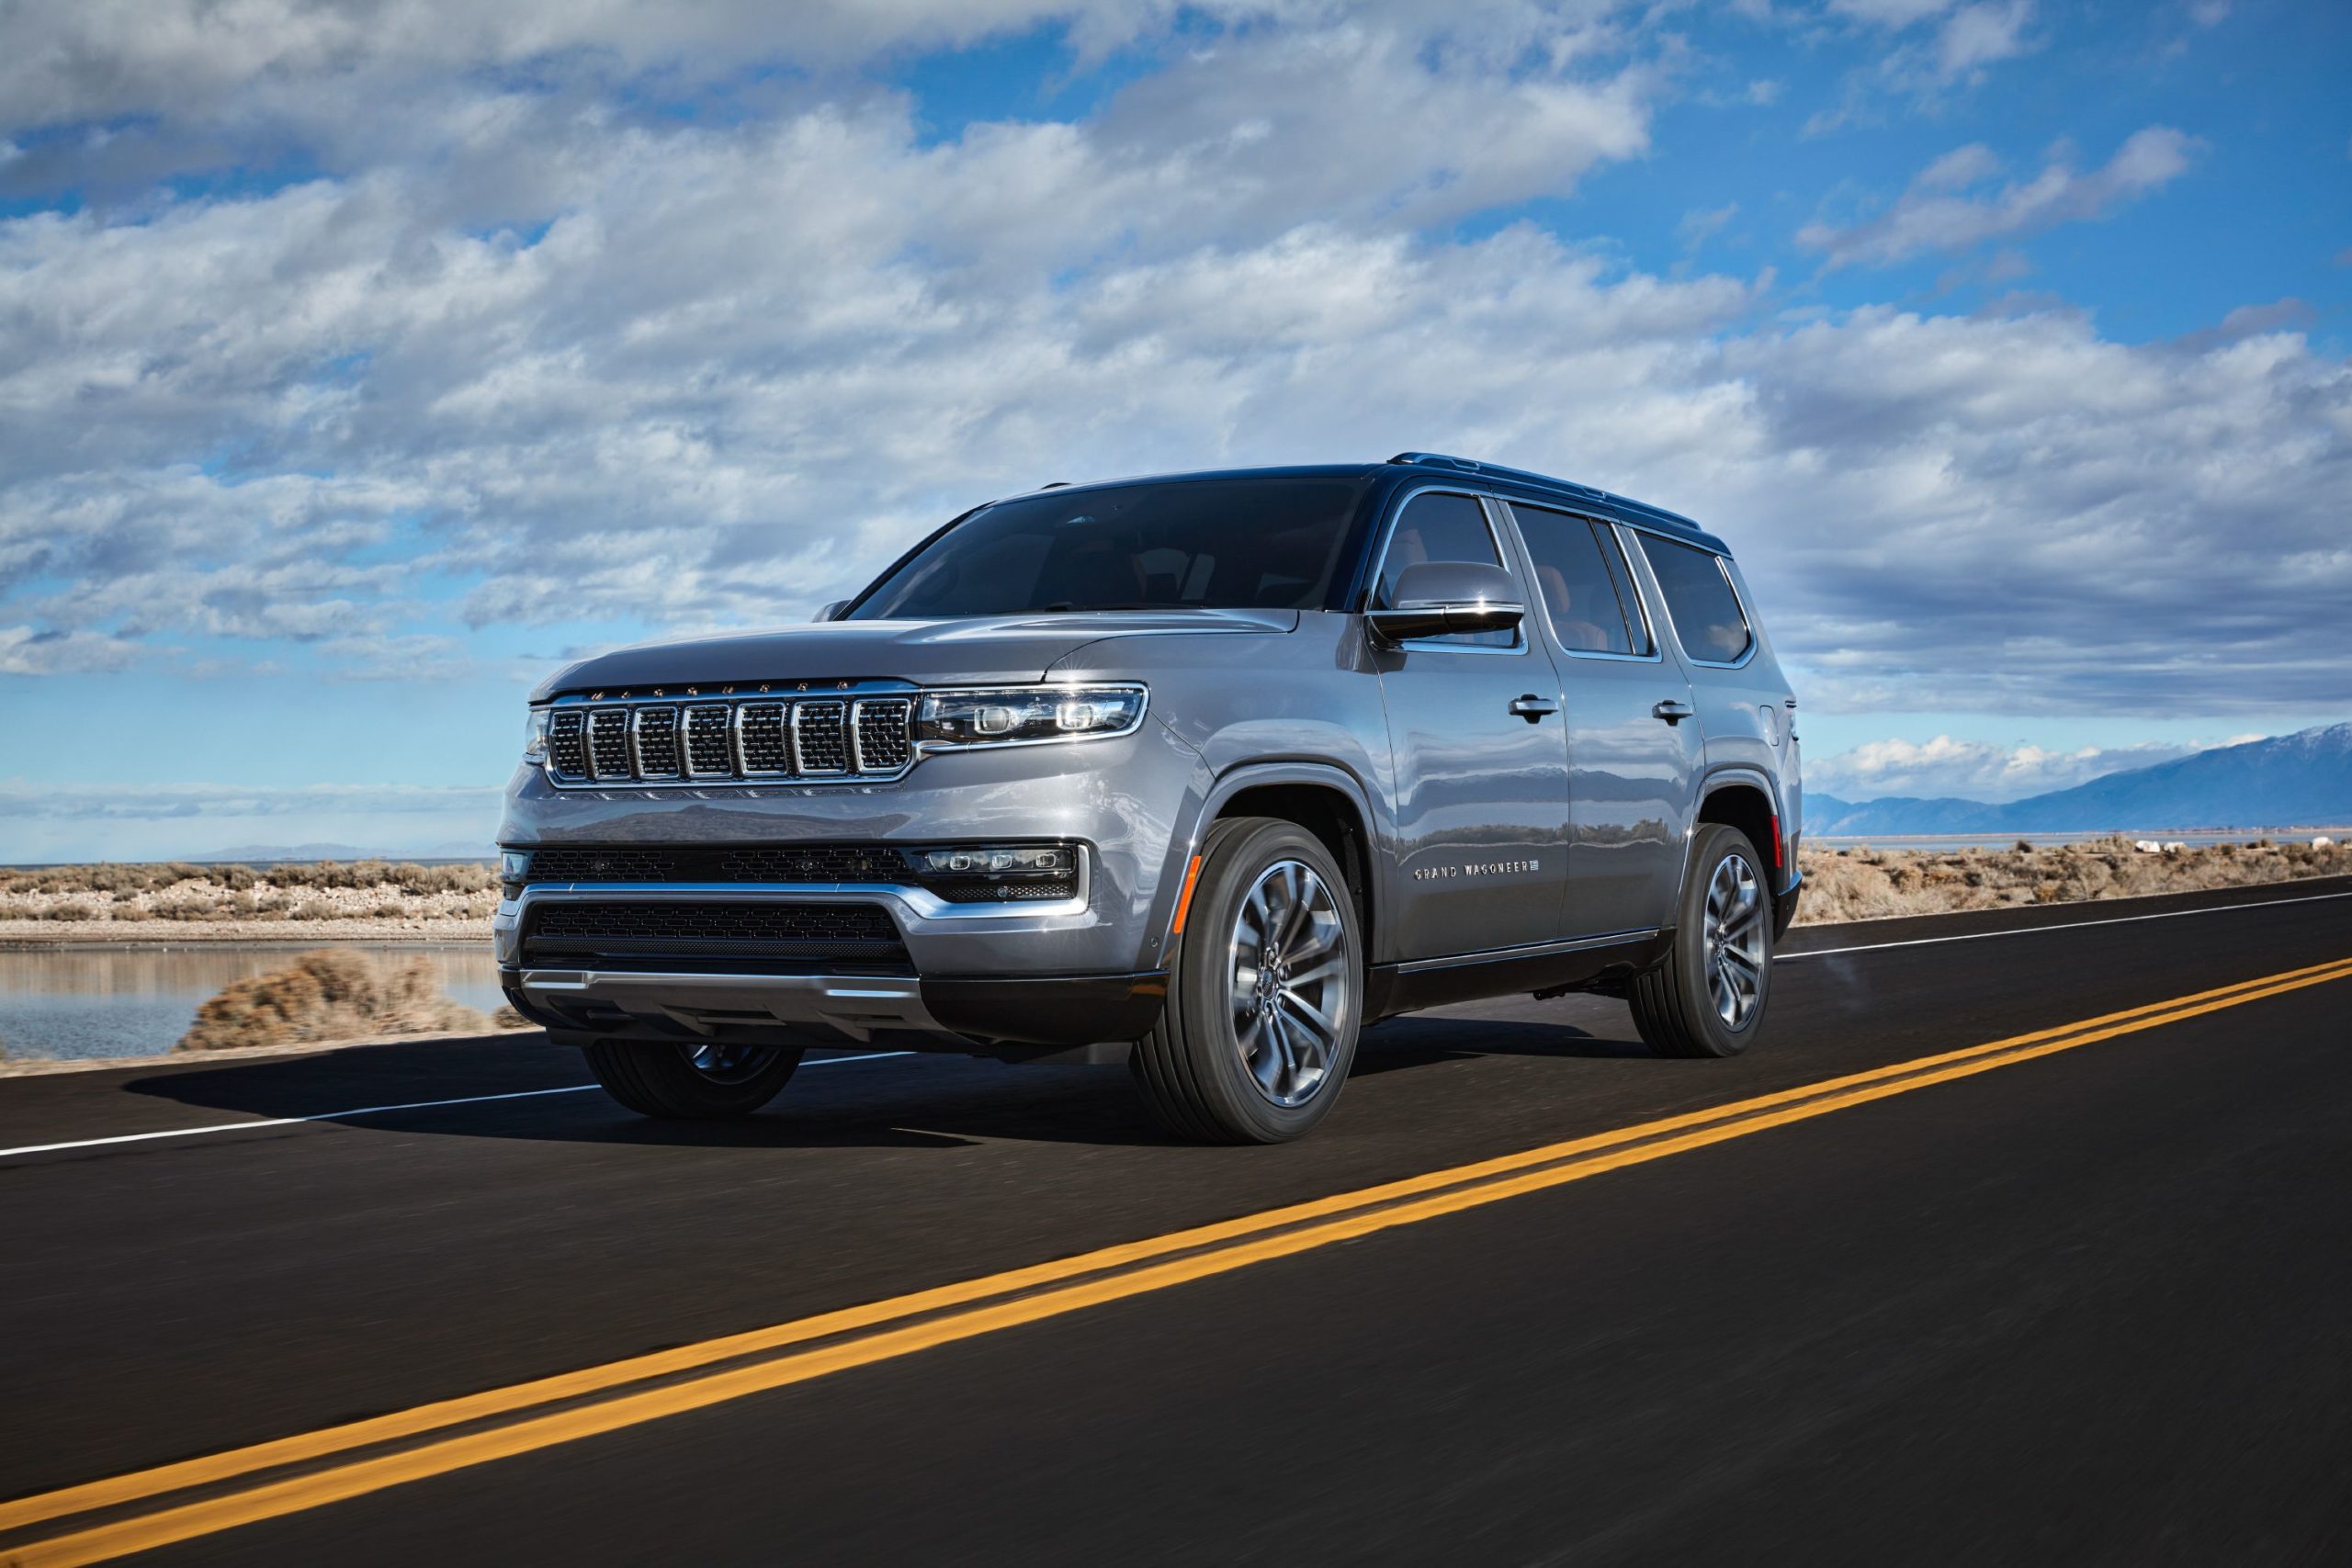 2022 Jeep Grand Wagoneer EPA Fuel Economy Ratings Are Out